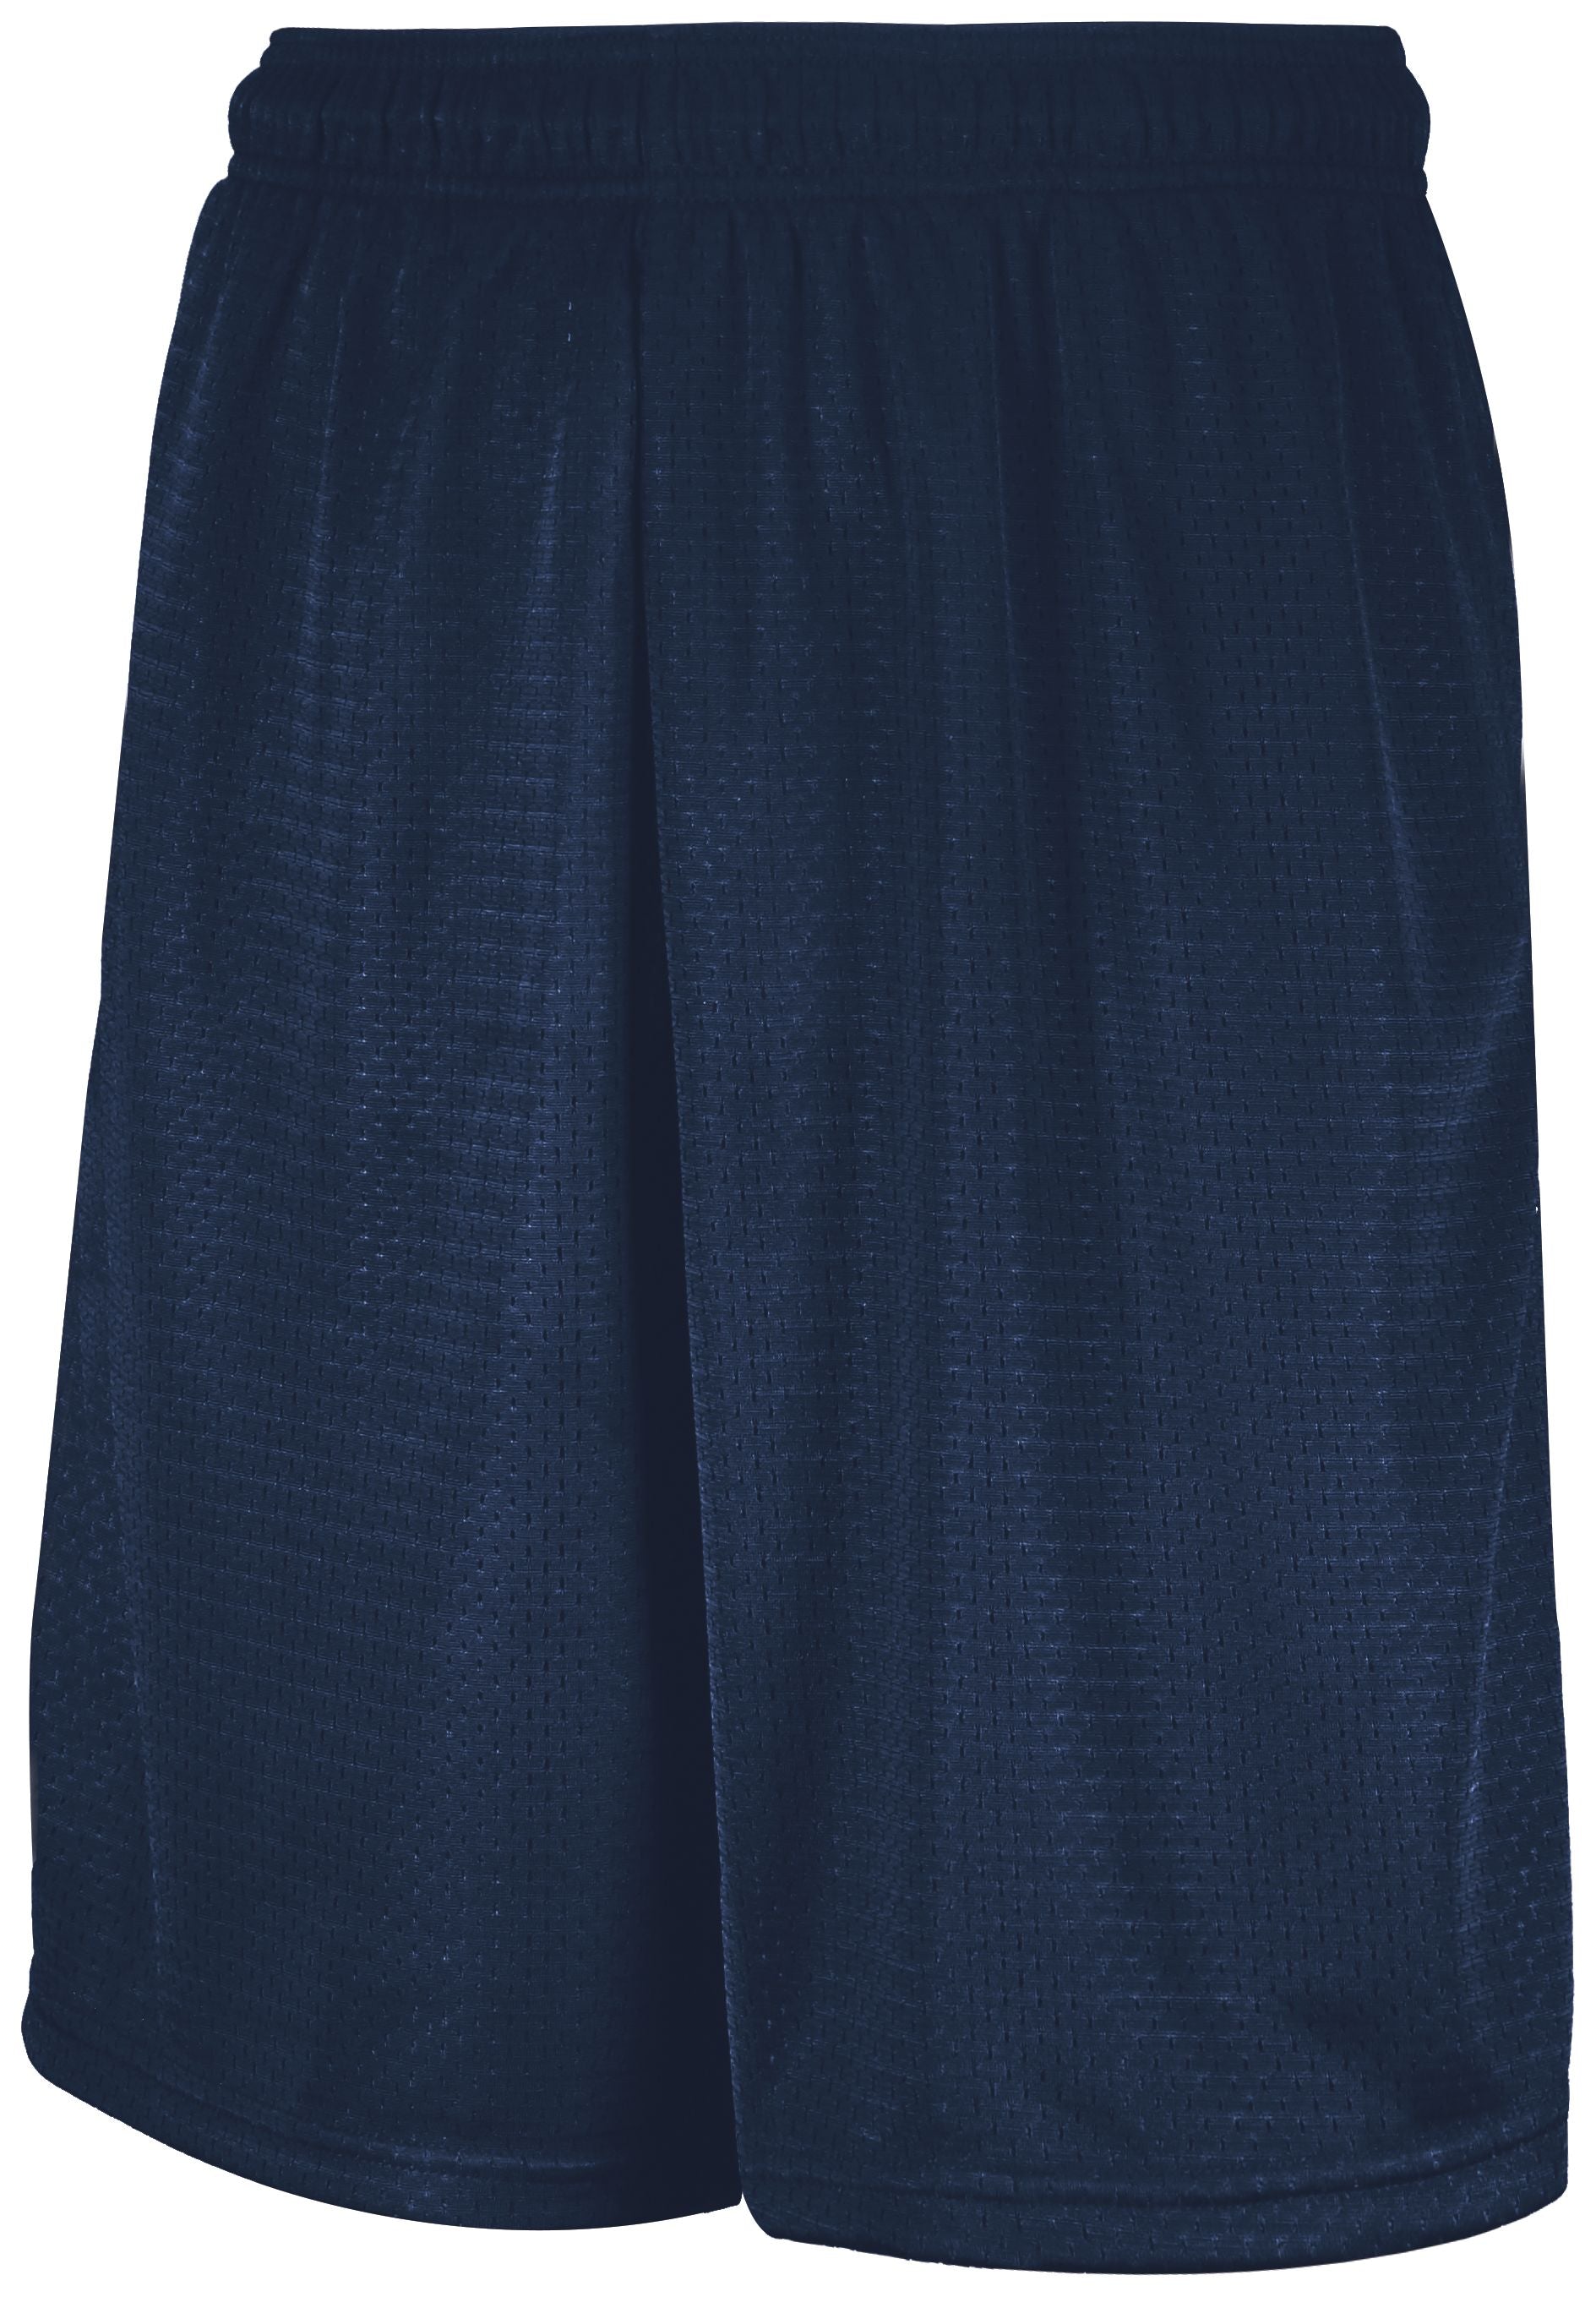 Russell Athletic Mesh Shorts With Pockets in Navy  -Part of the Adult, Adult-Shorts, Russell-Athletic-Products product lines at KanaleyCreations.com